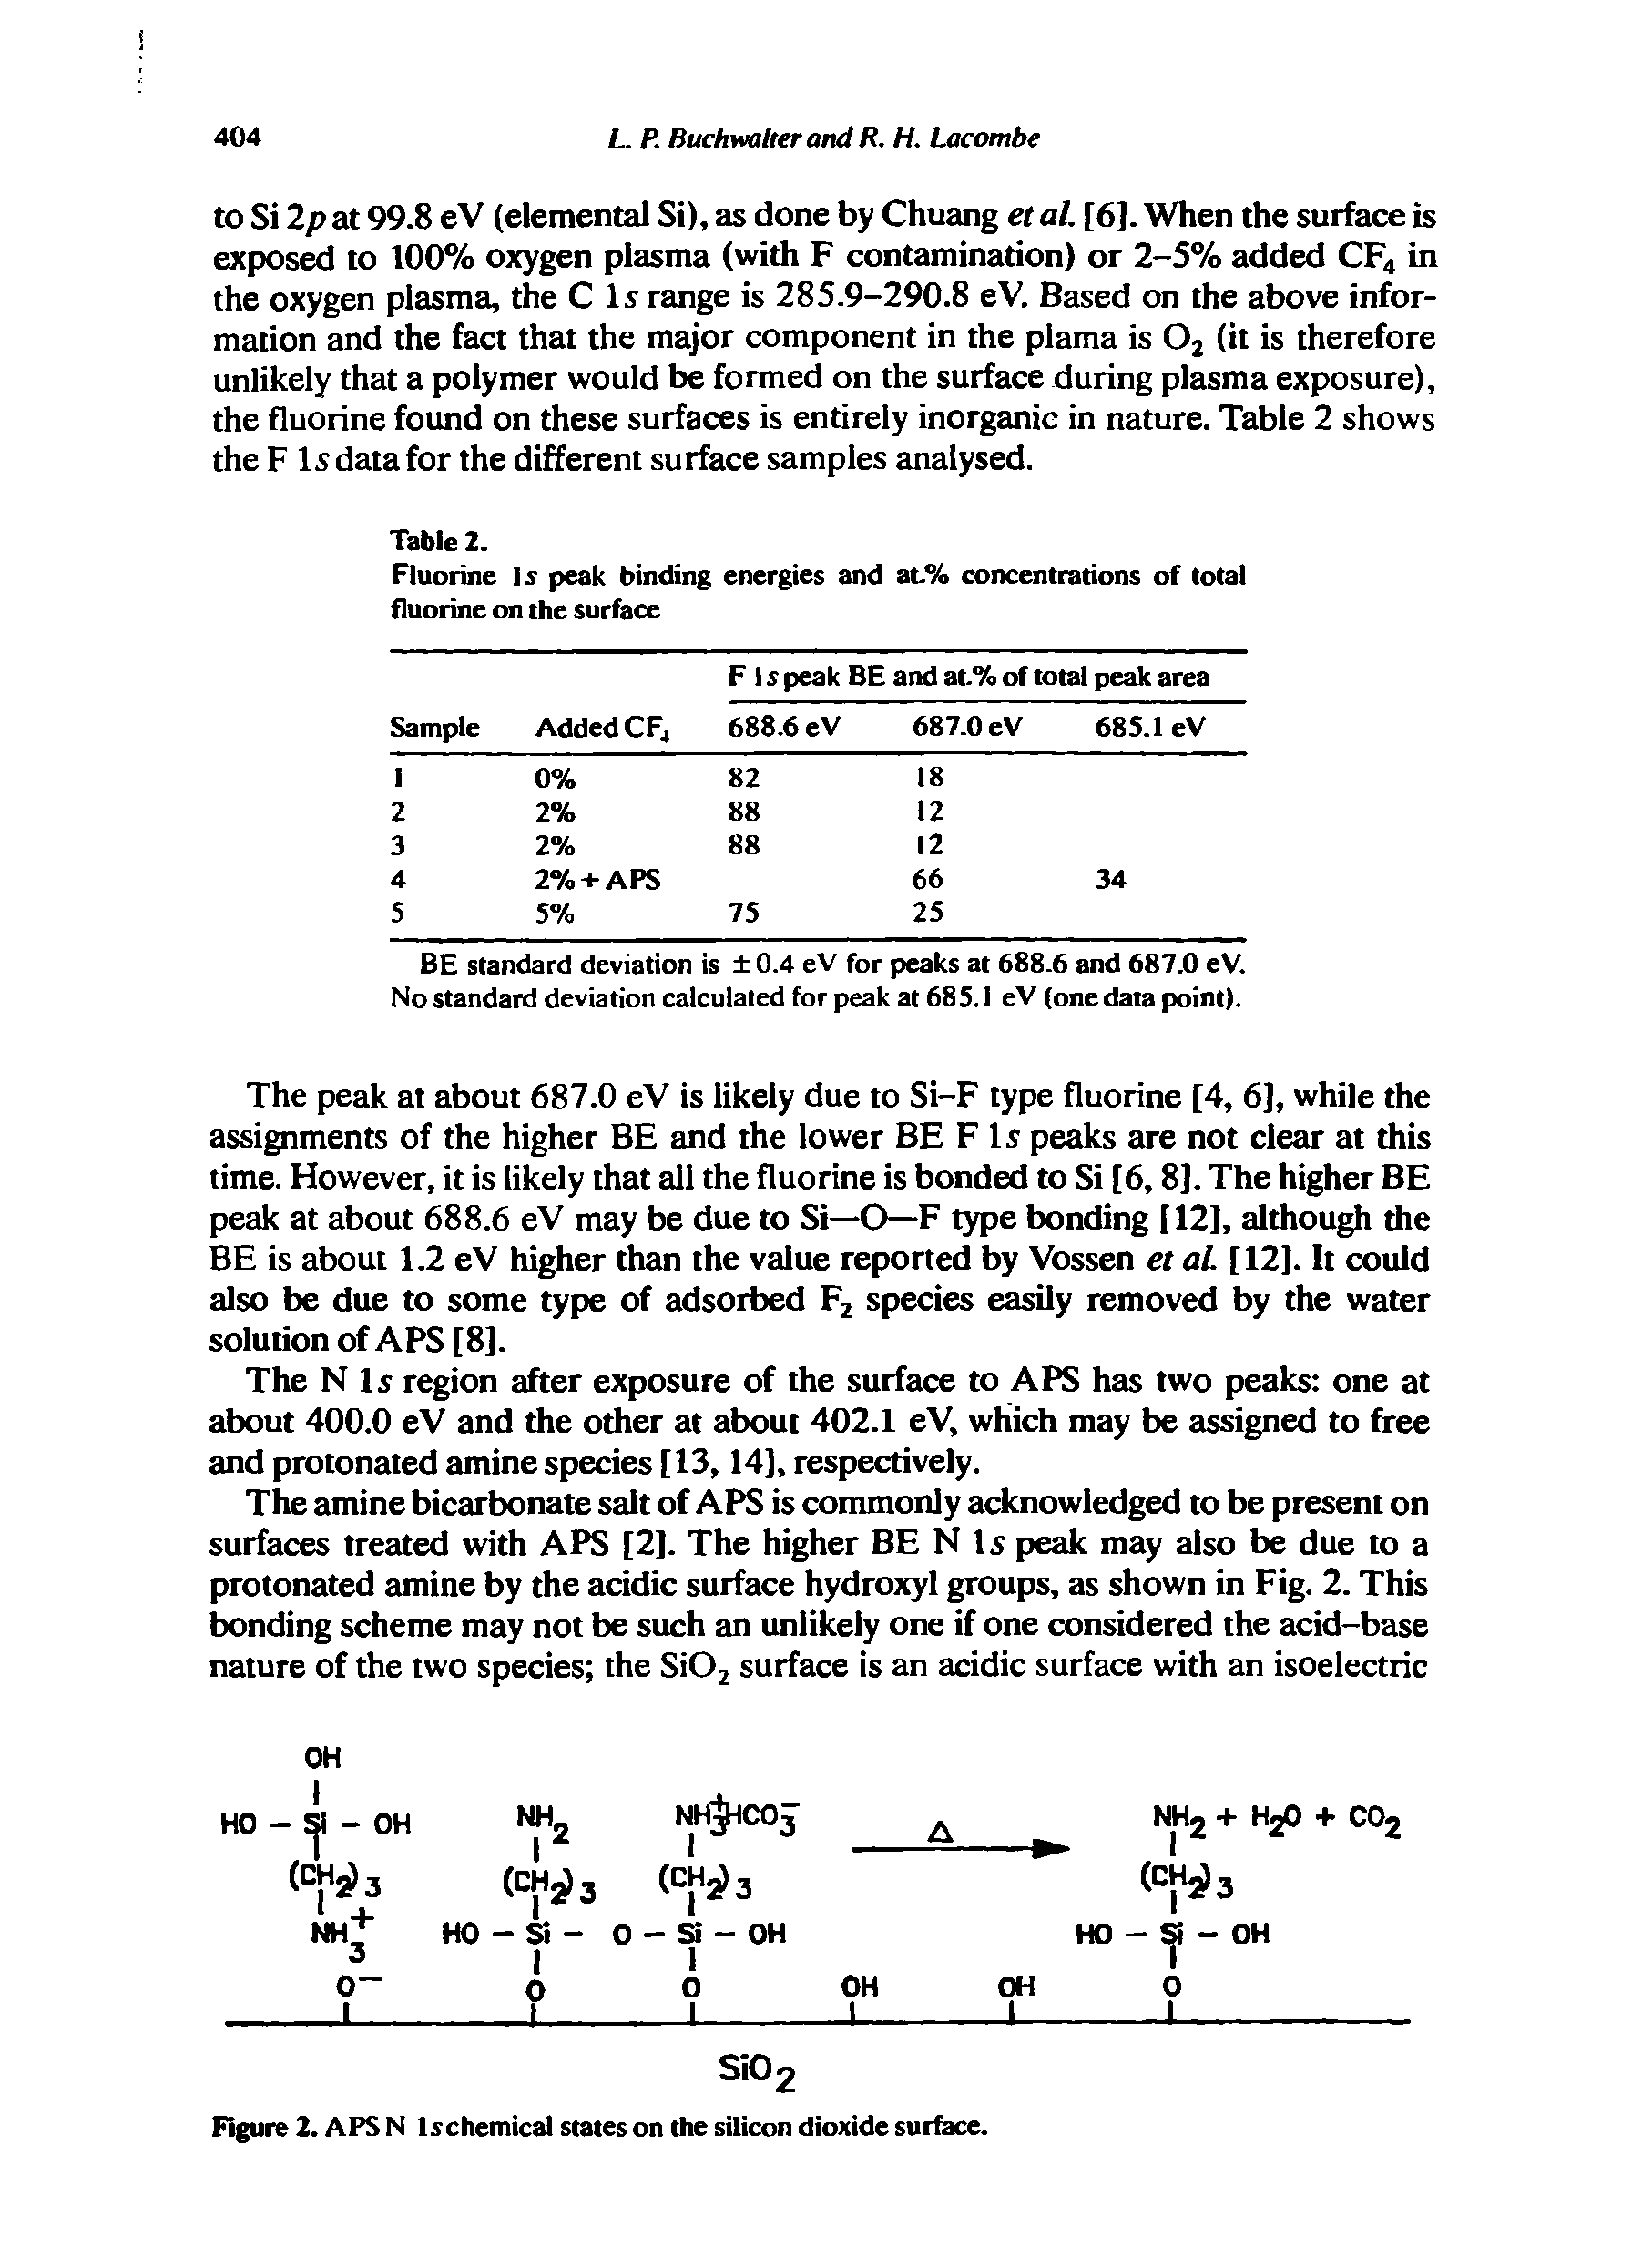 Figure 2. APS N lschemical states on the silicon dioxide surface.